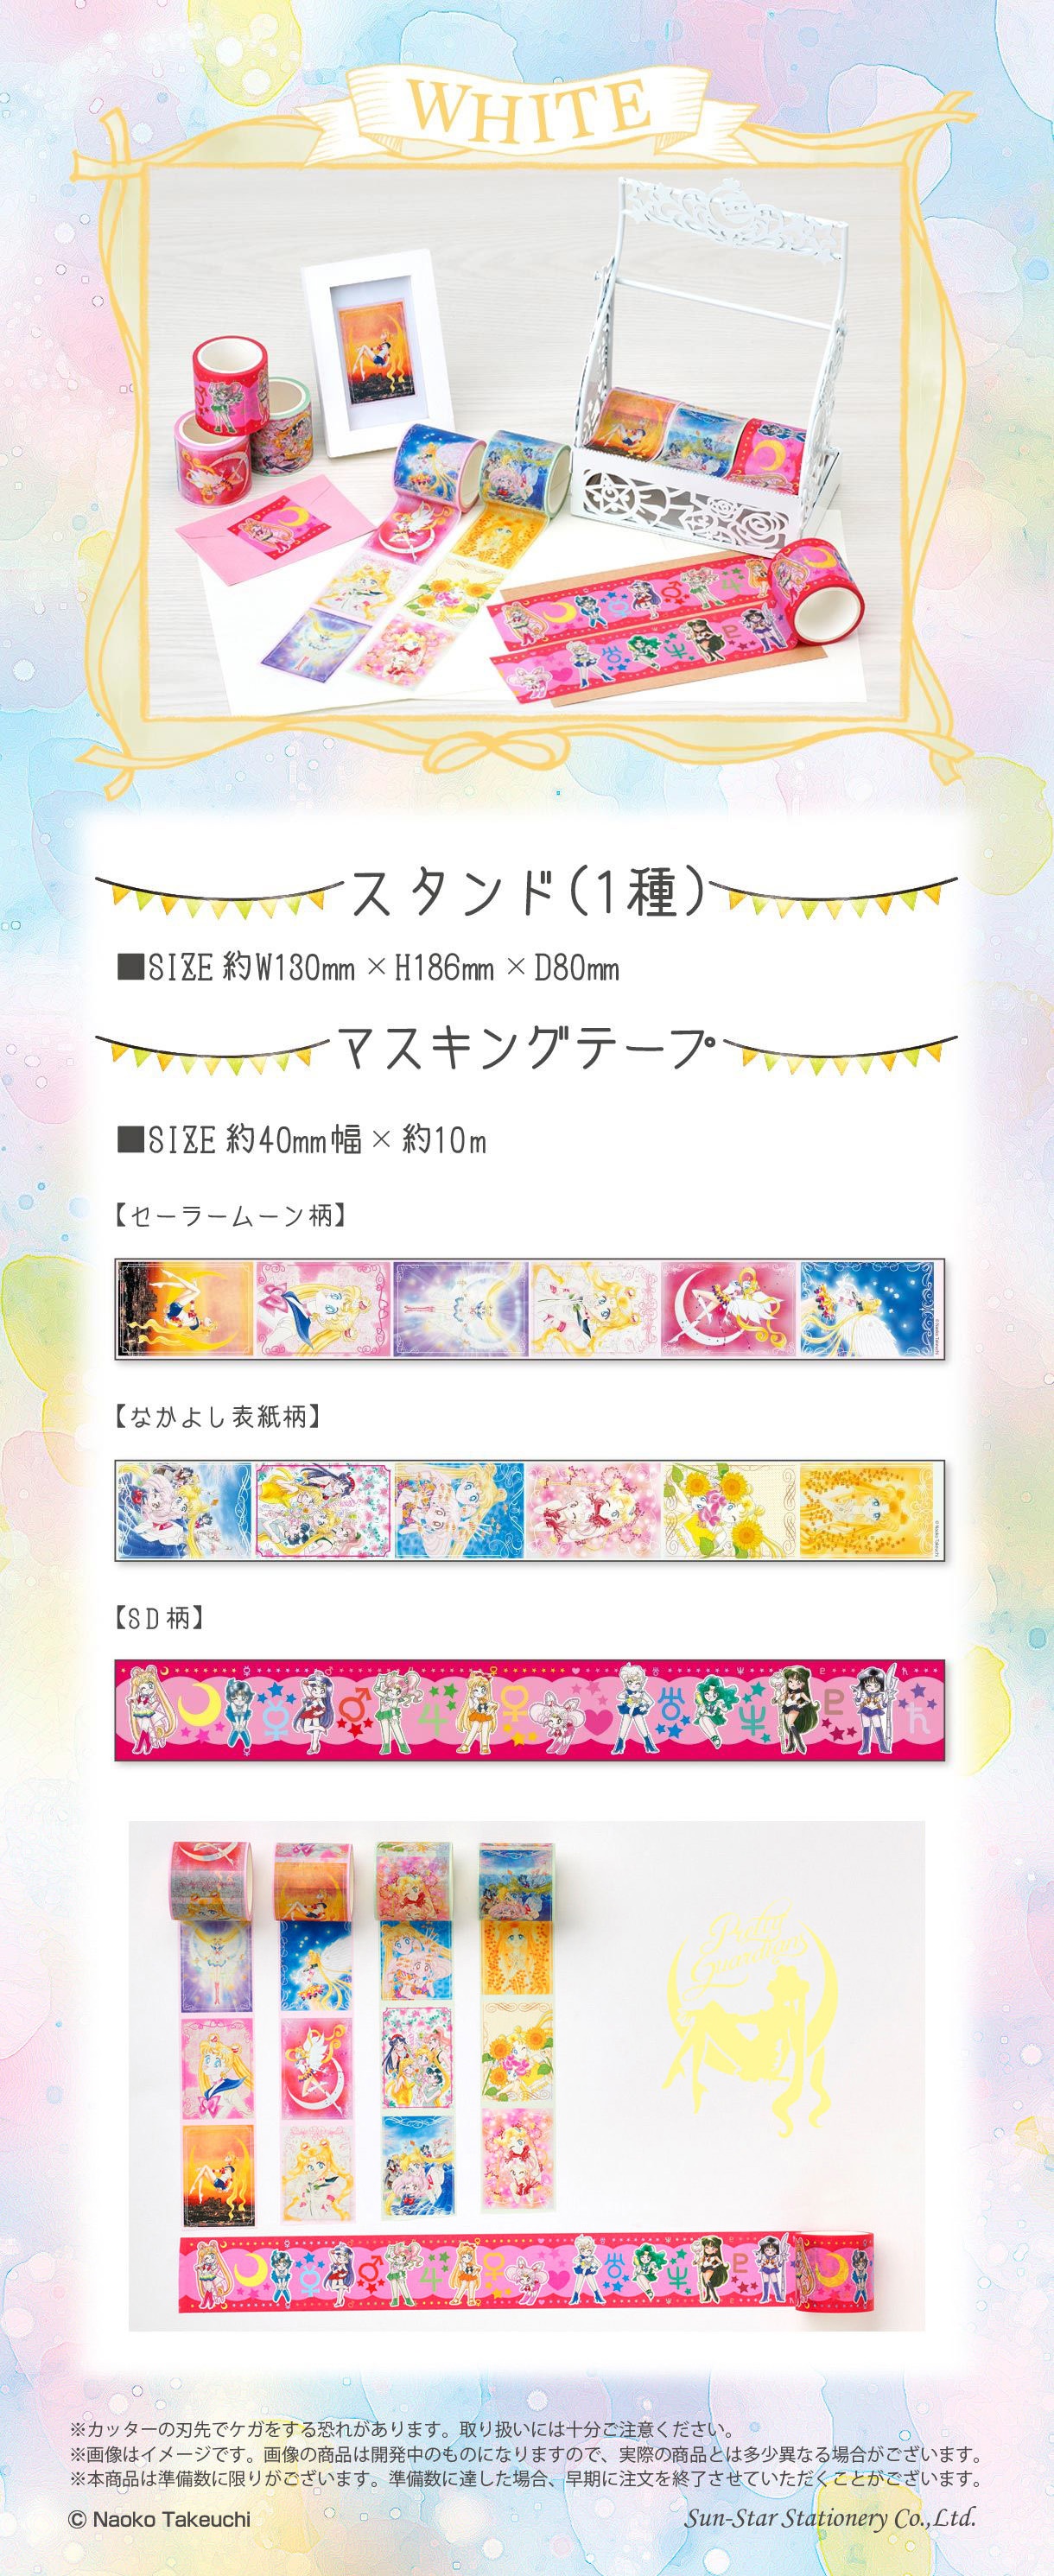 Sailor Moon Masking Tape & Stand Set Fan Club Edition Details